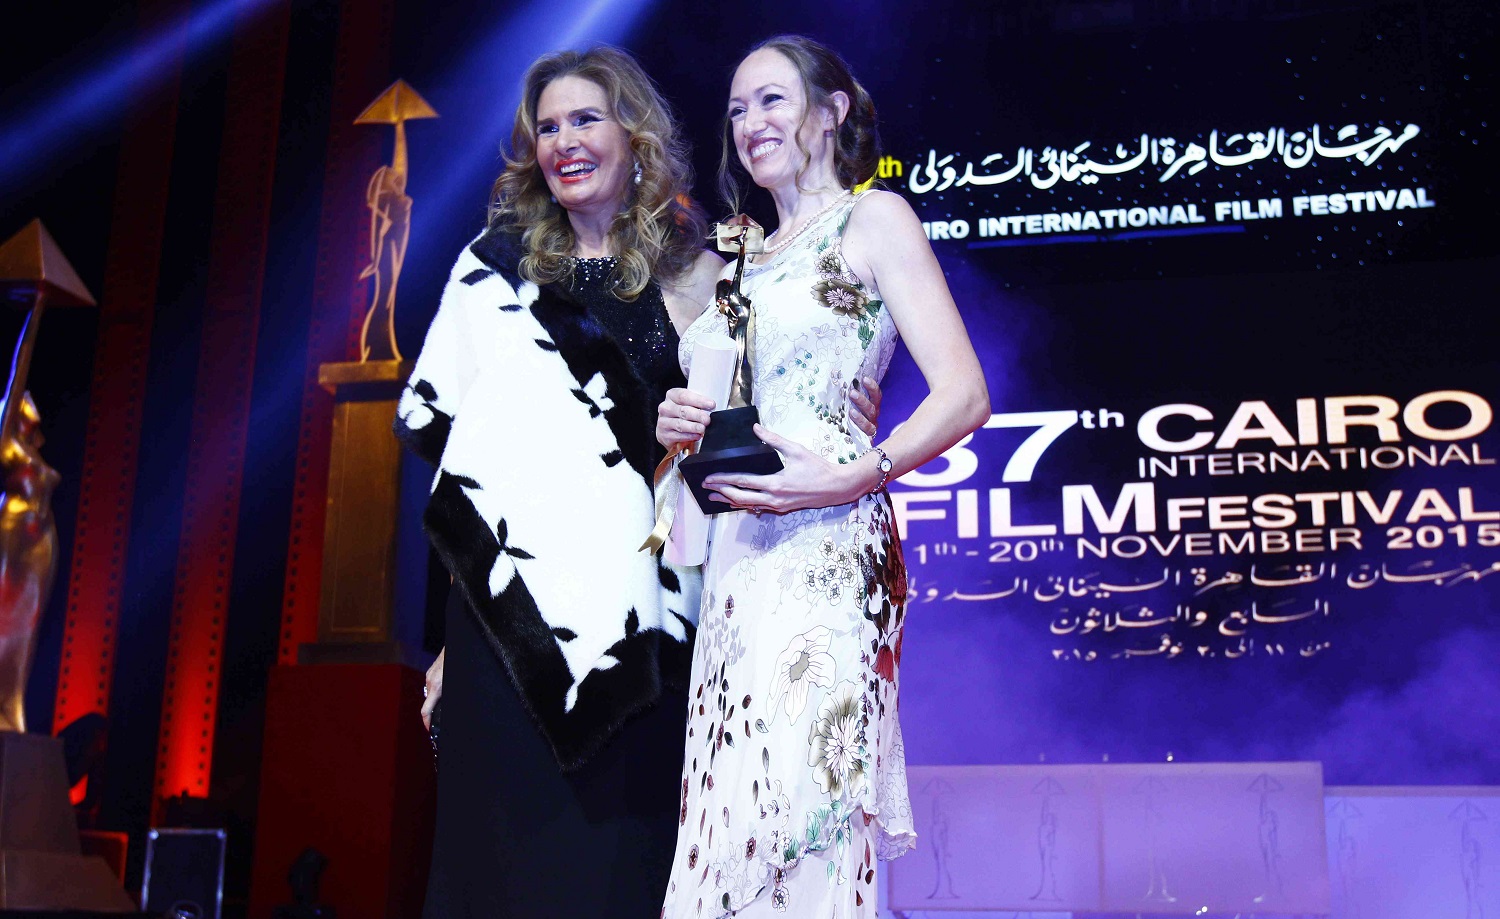 Cairo International Film Festival to Become First Arab Festival to Sign Gender Equality Pledge